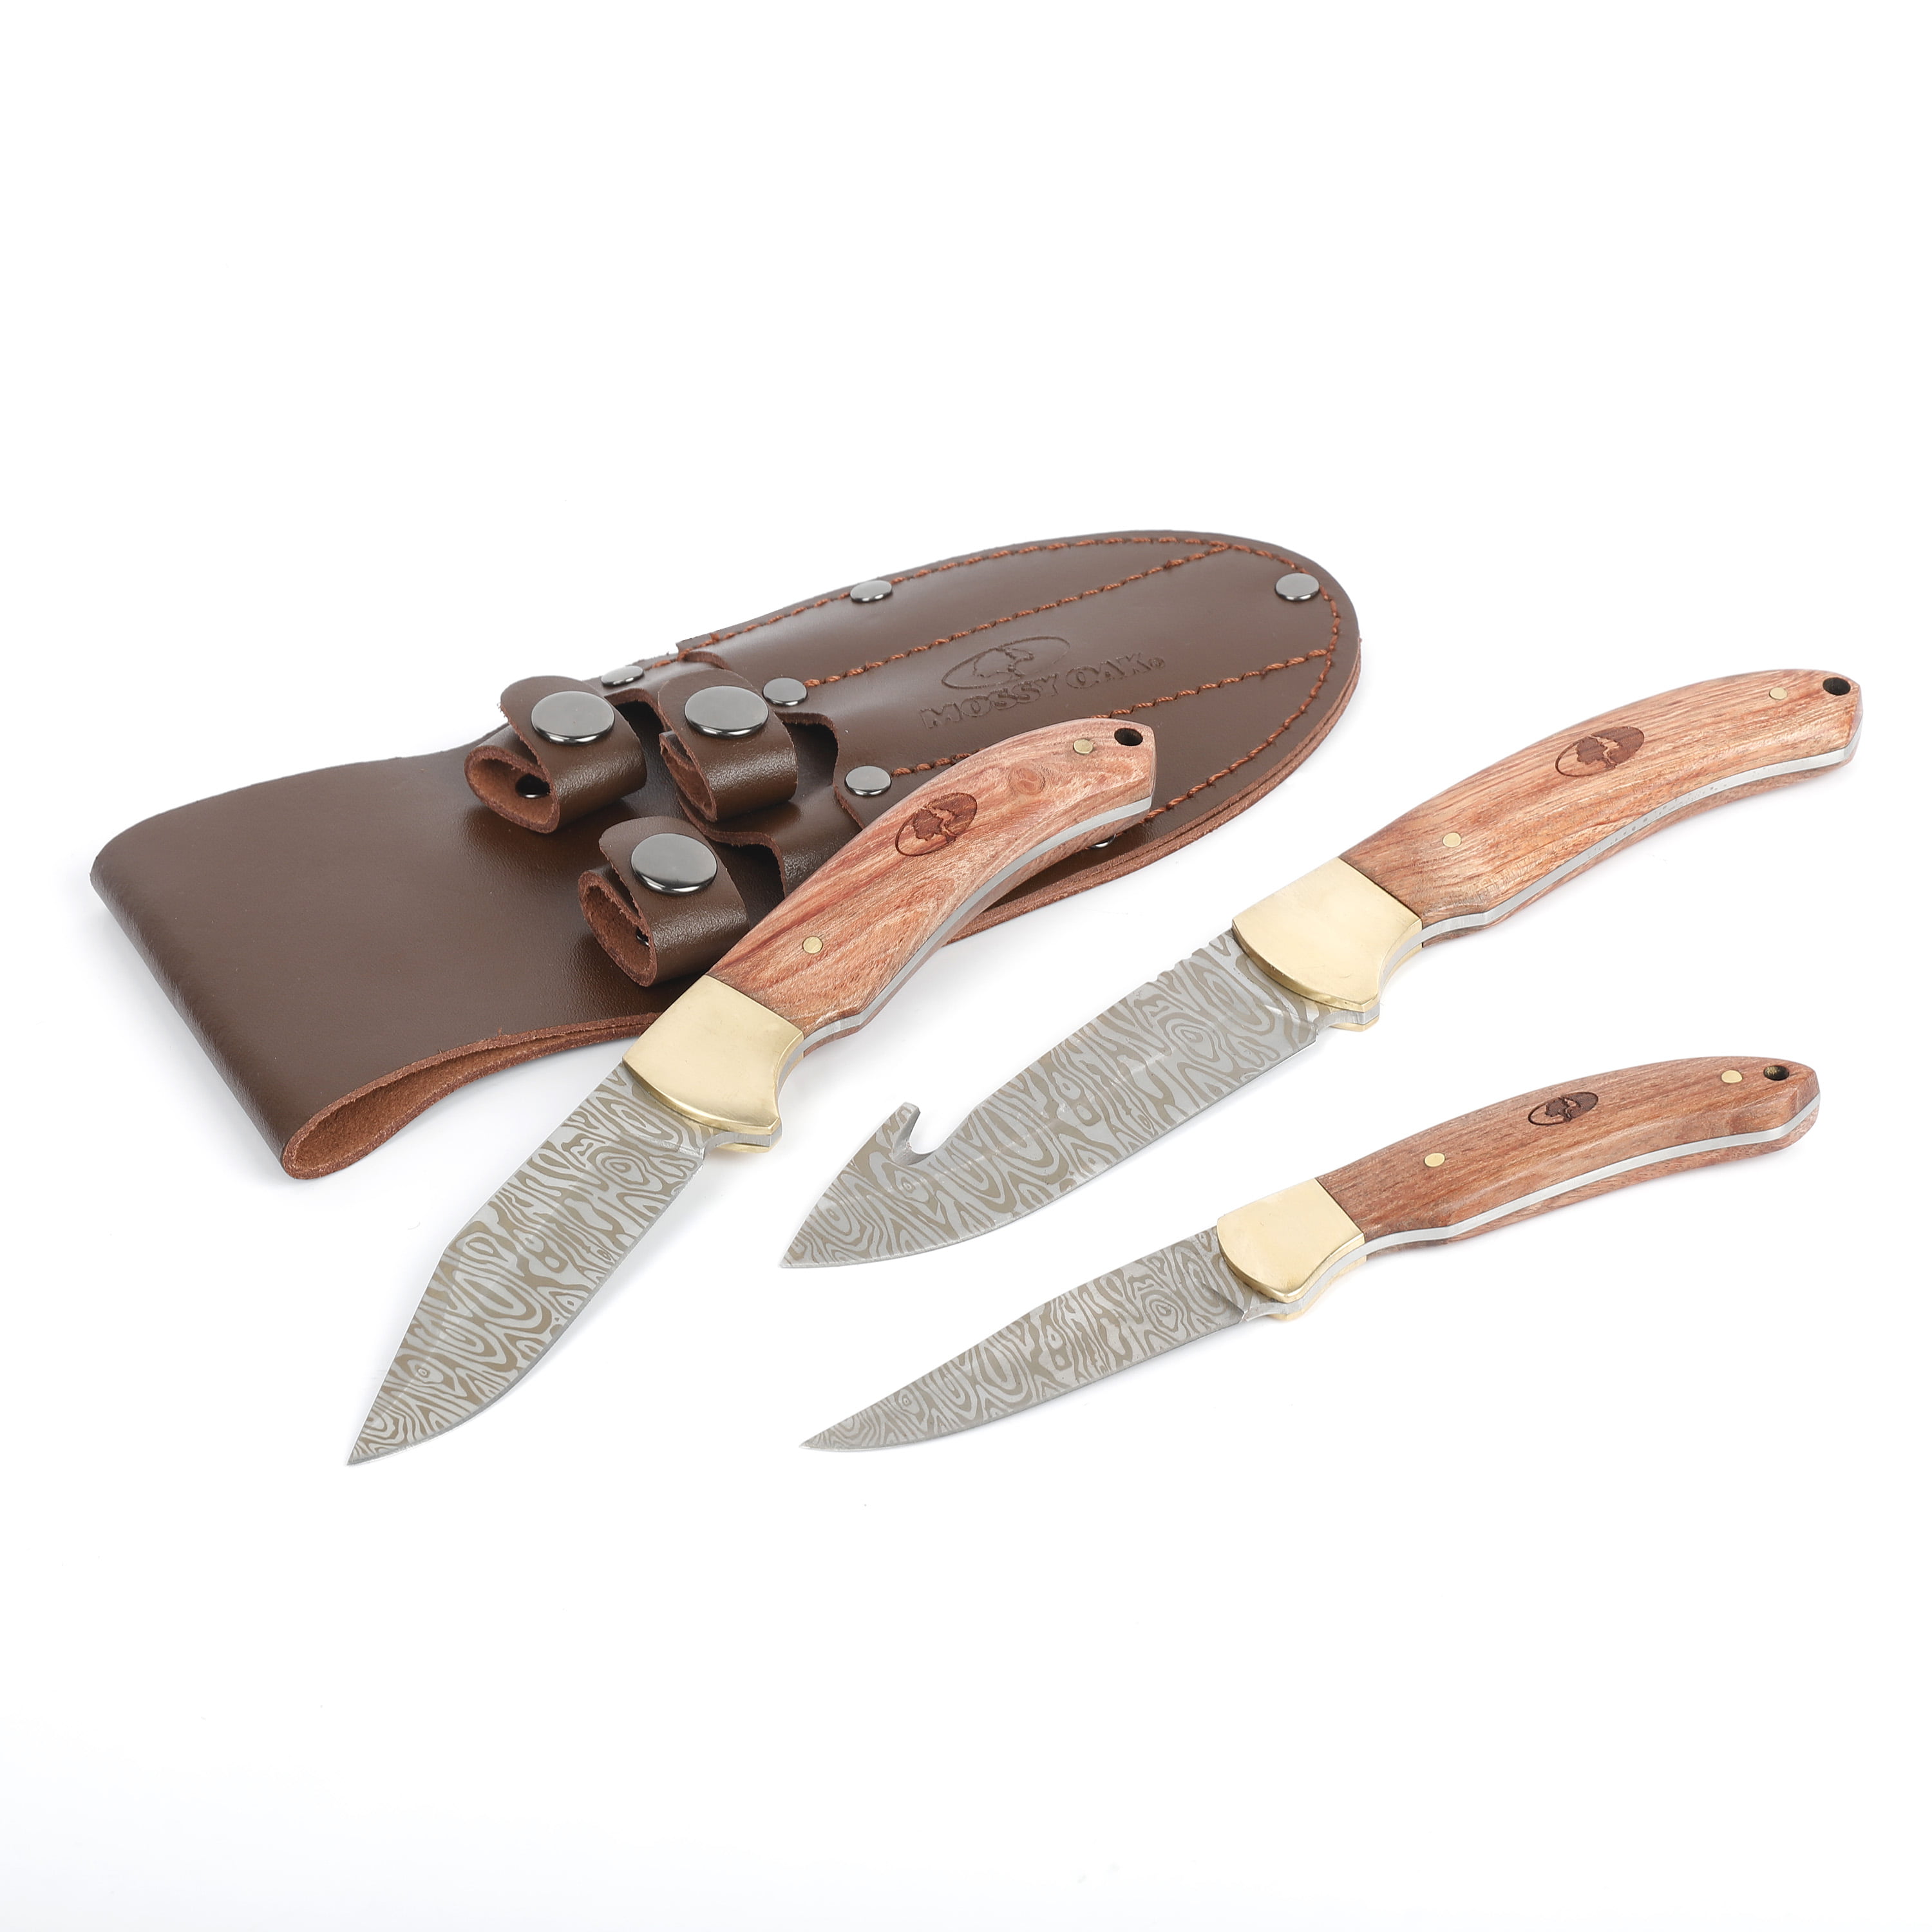 Mossy Oak 3 Piece Wood Finish Stainless Steel Knife Set with Leather Sheath (Brown) $15 + Free S&H w/ Walmart+ or $35+